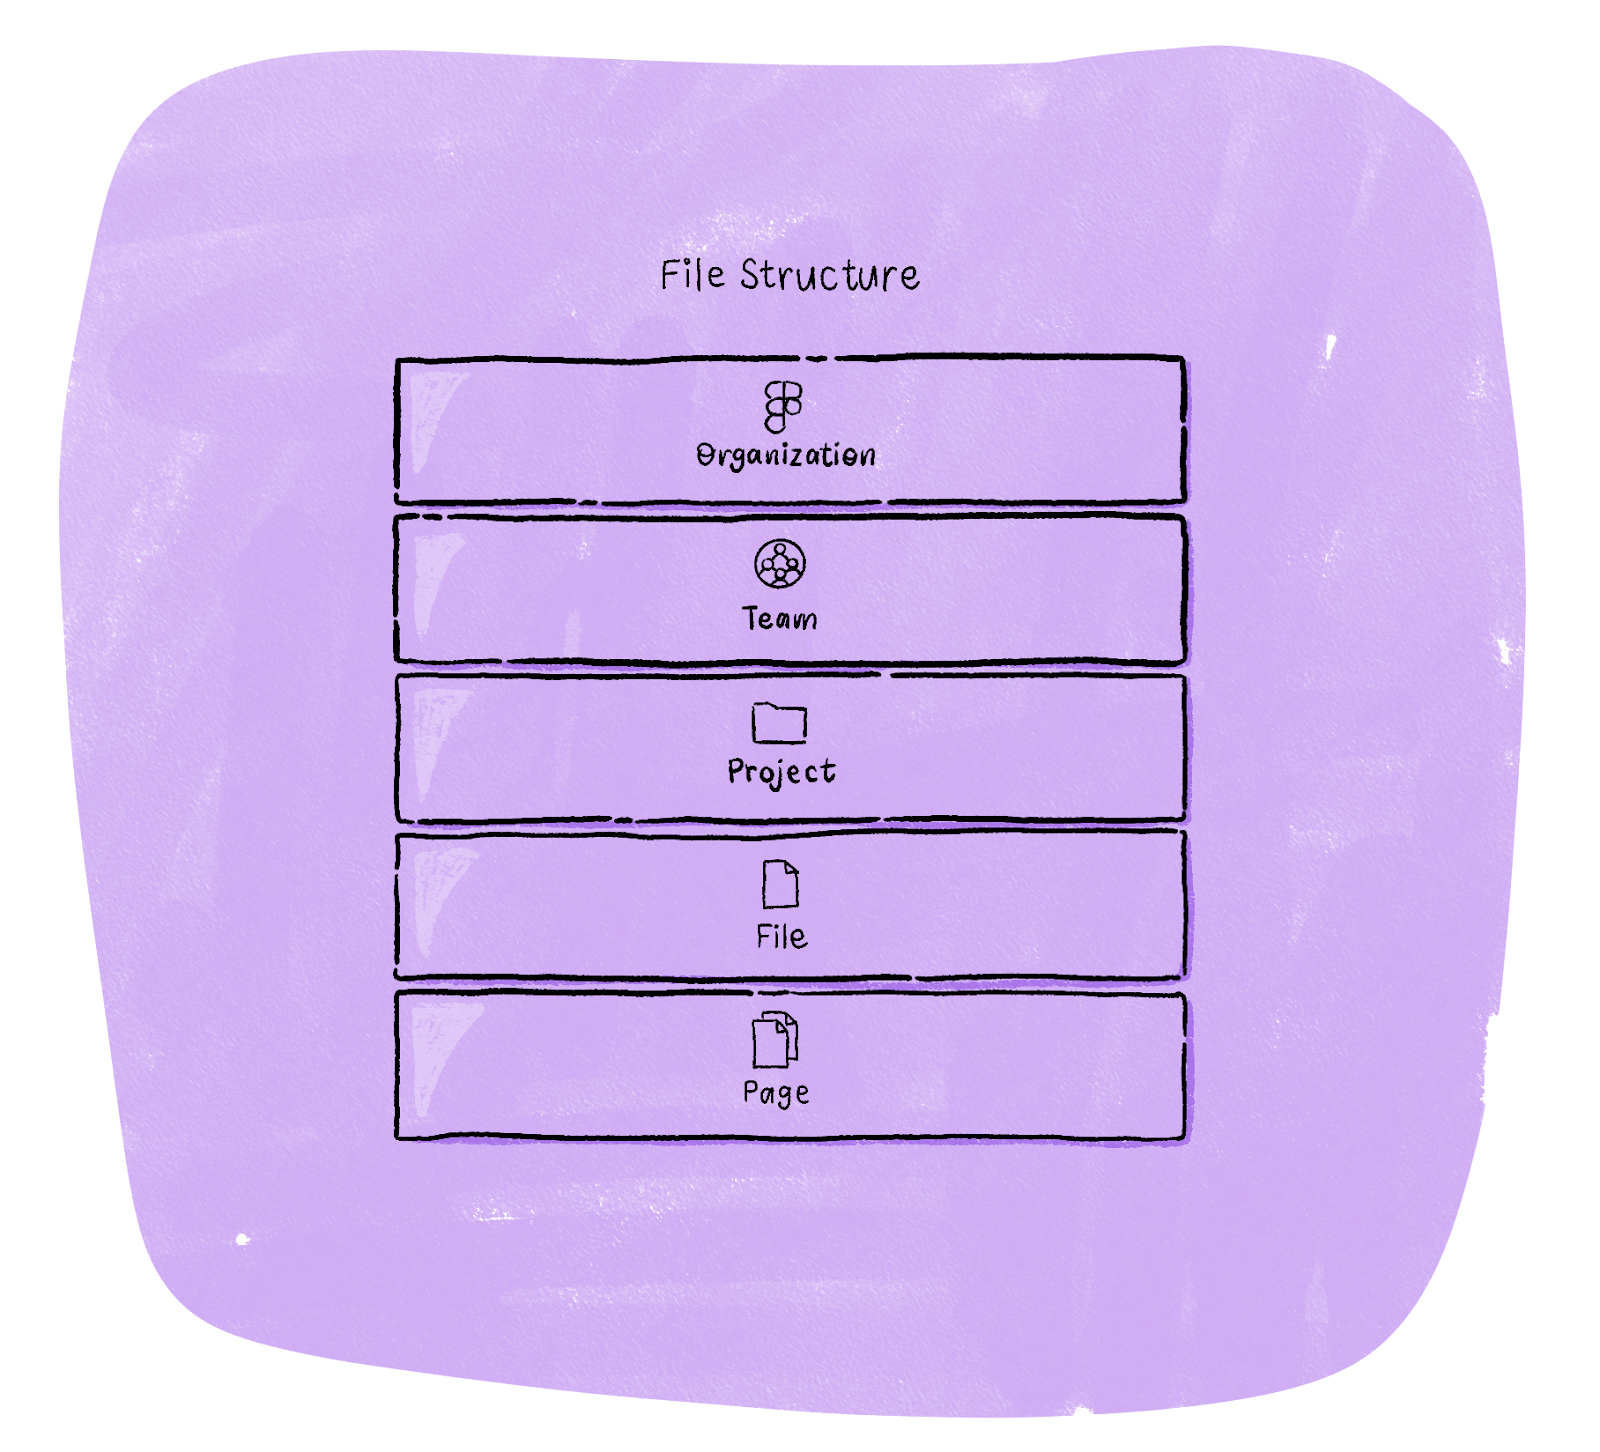 A diagram of how Figma name their different levels: Organization > Team > Project > File > Page